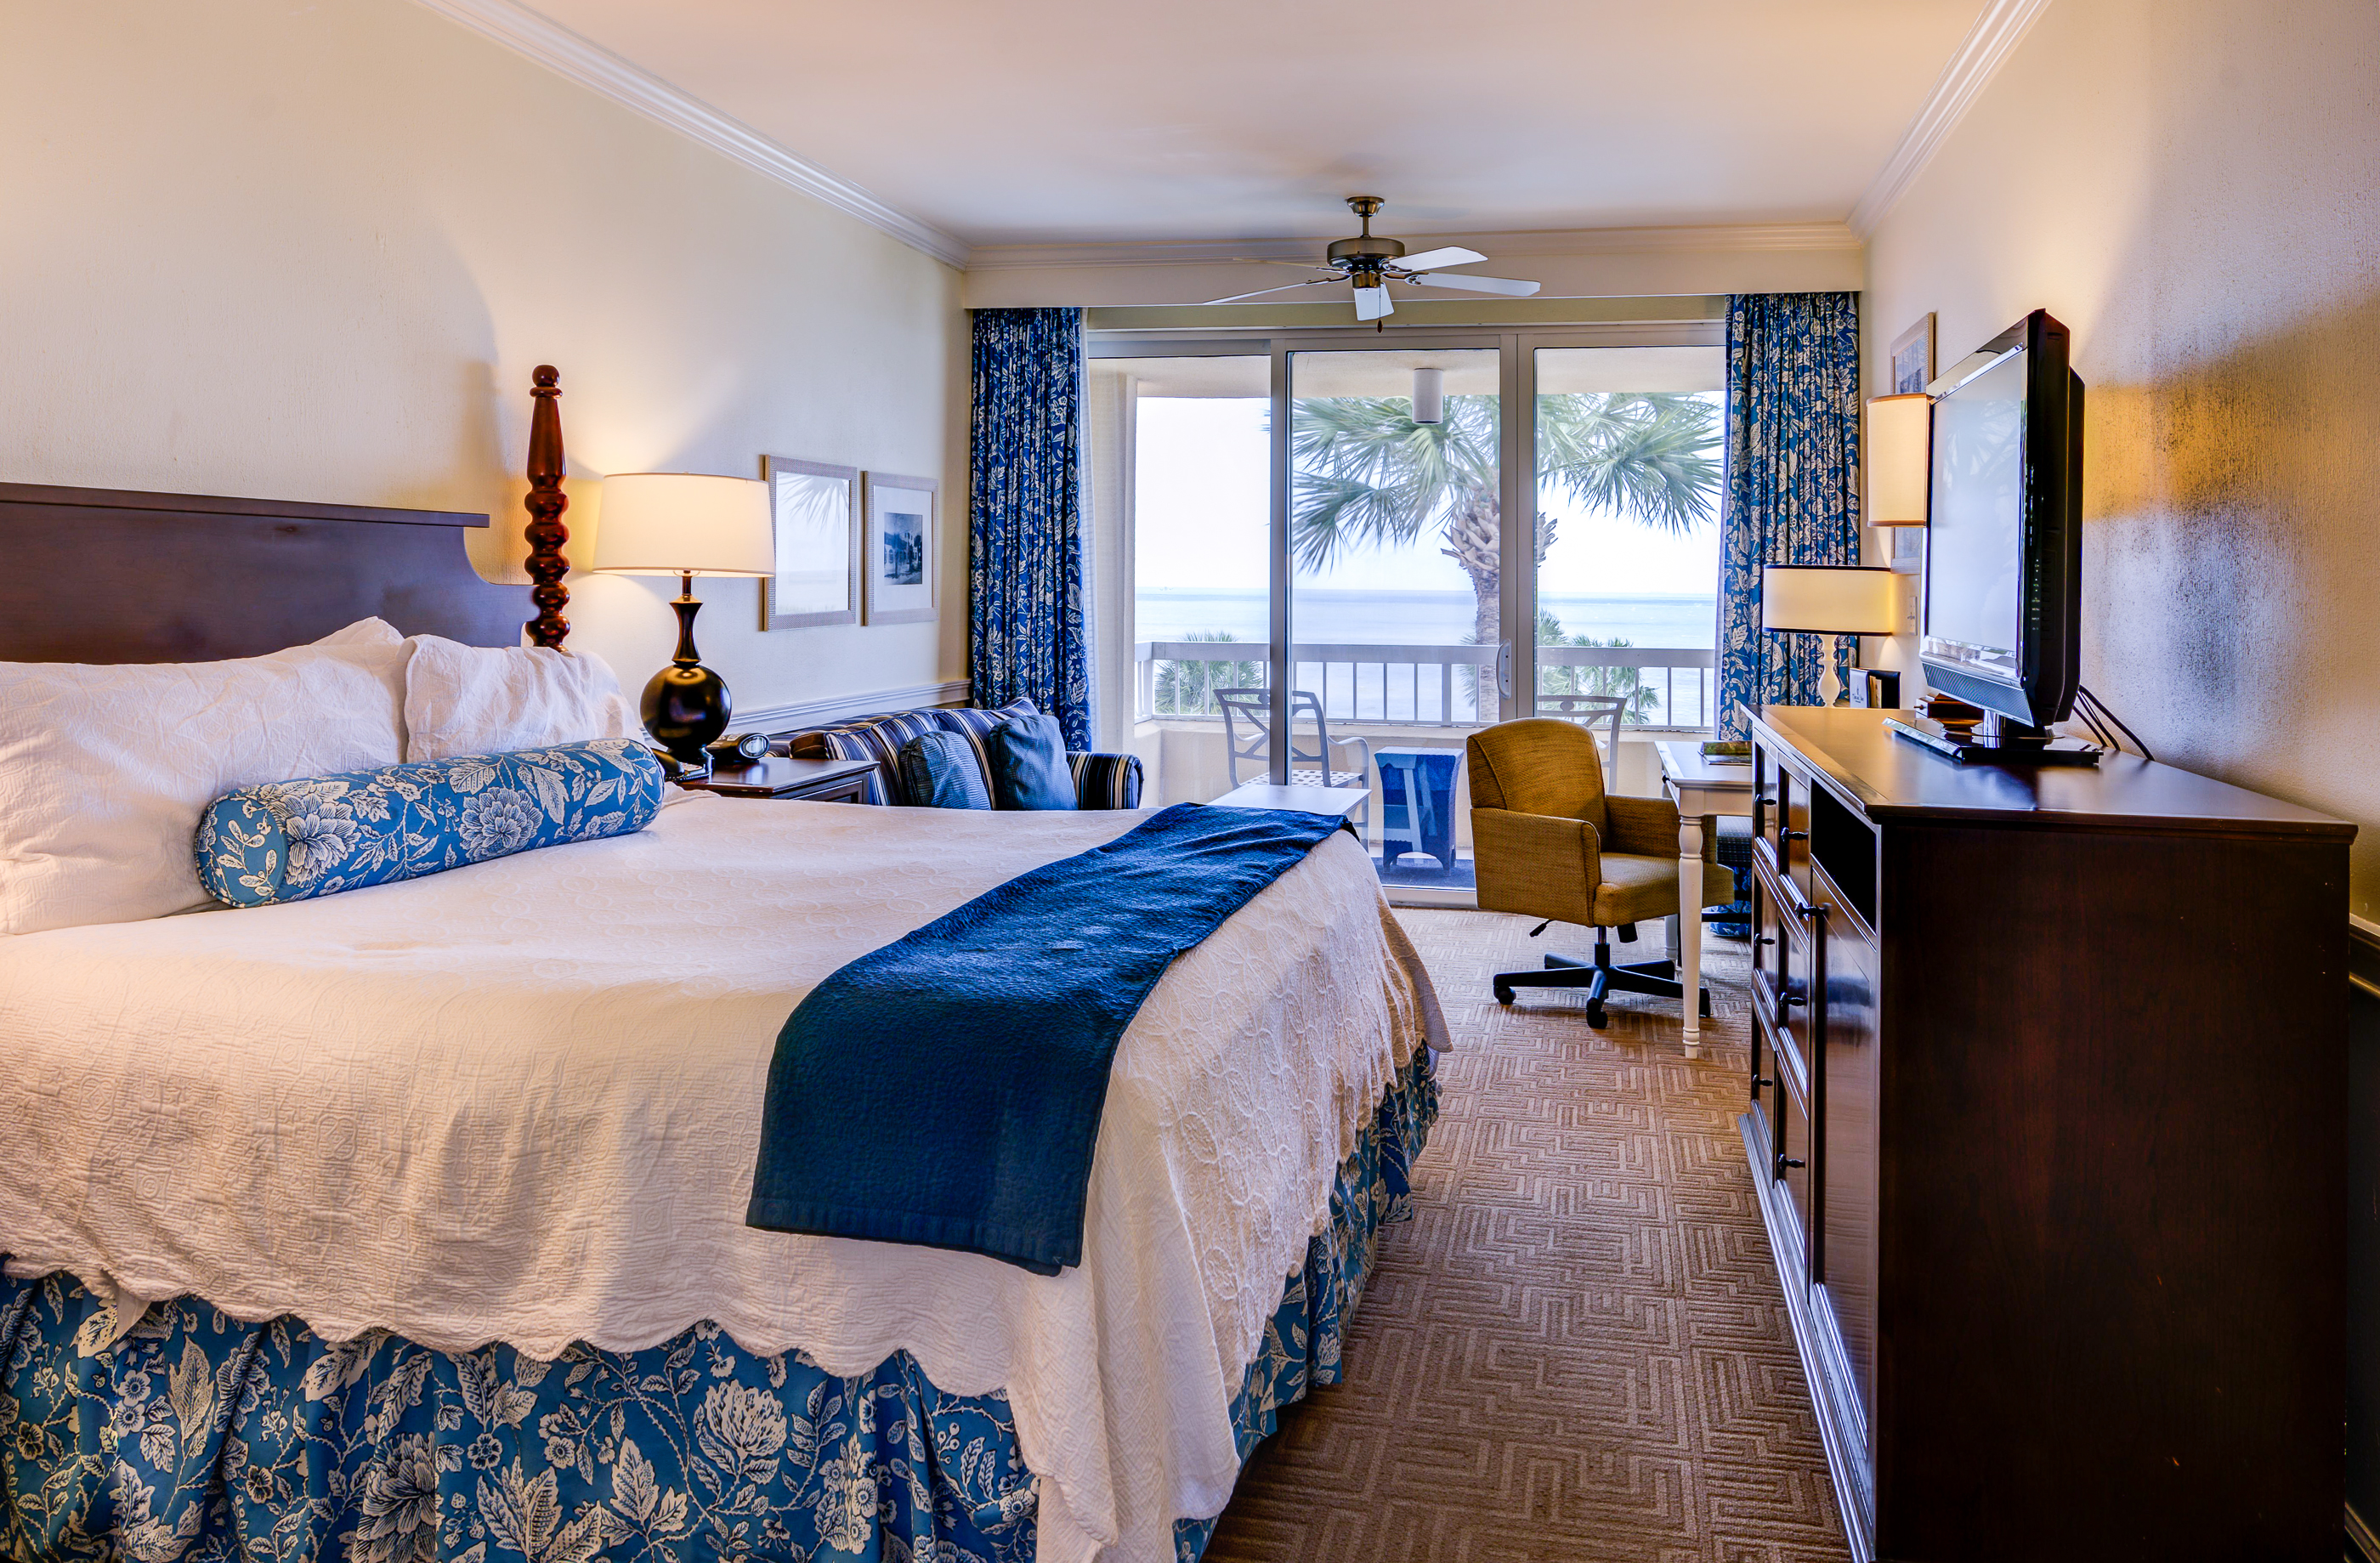 Planning a family trip to St. Simon's Island? Find out why you should stay at the beautiful King of Prince resort where simple pleasures flourish and true Southern hospitality abounds. The island's only beachfront lodging is waiting to welcome you with open arms. 